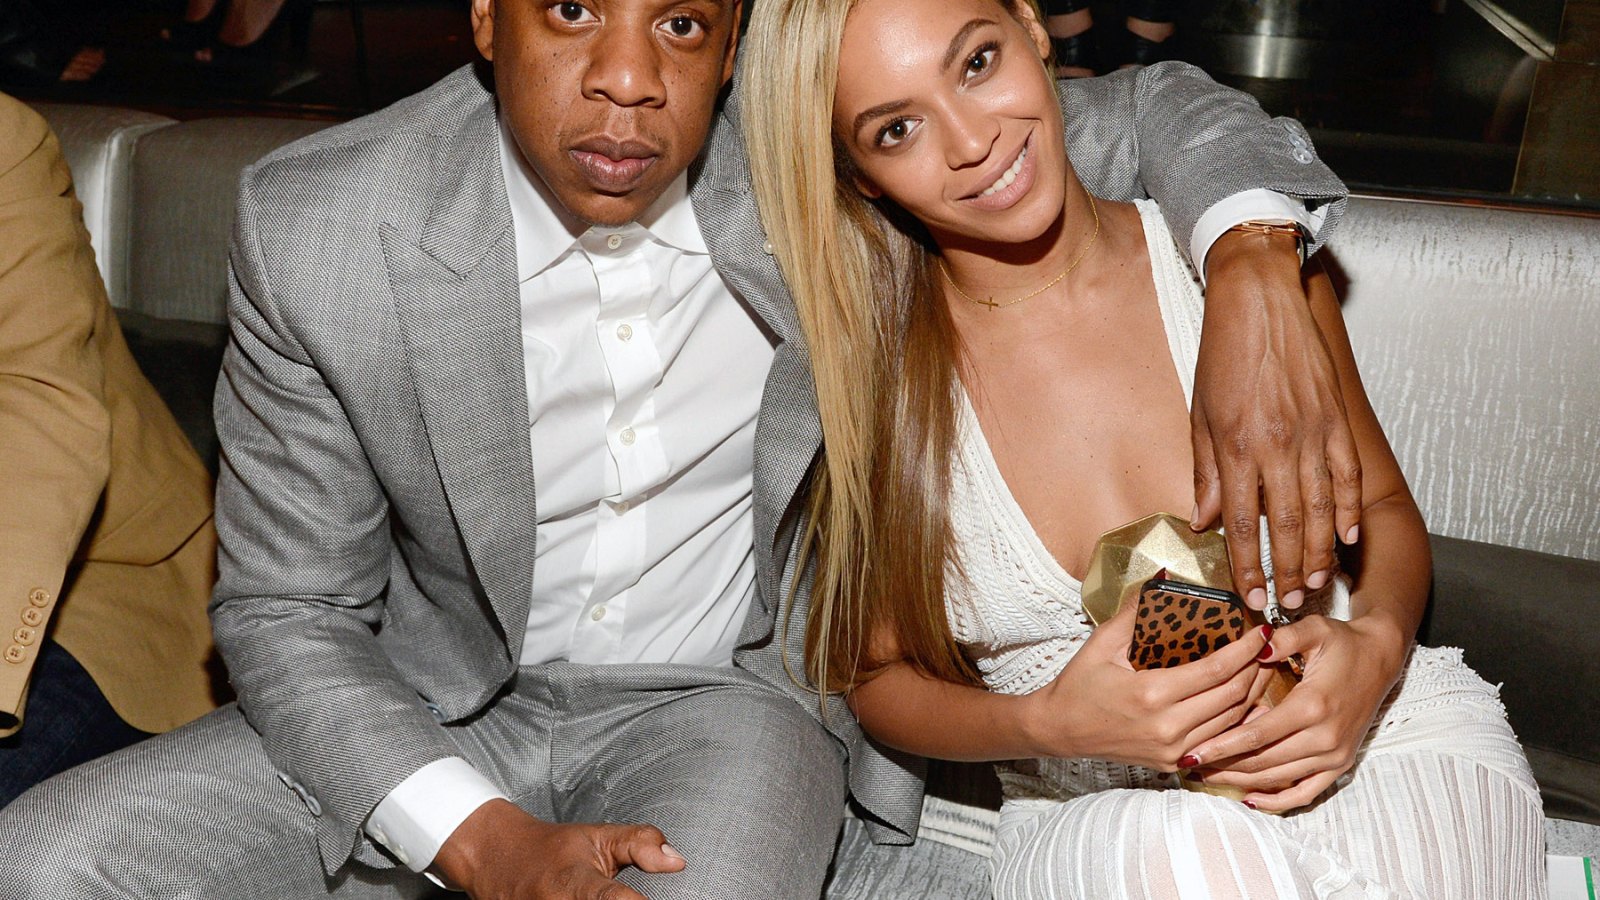 Jay-Z and Beyonce at 40/40 Club on June 17, 2013 in New York City